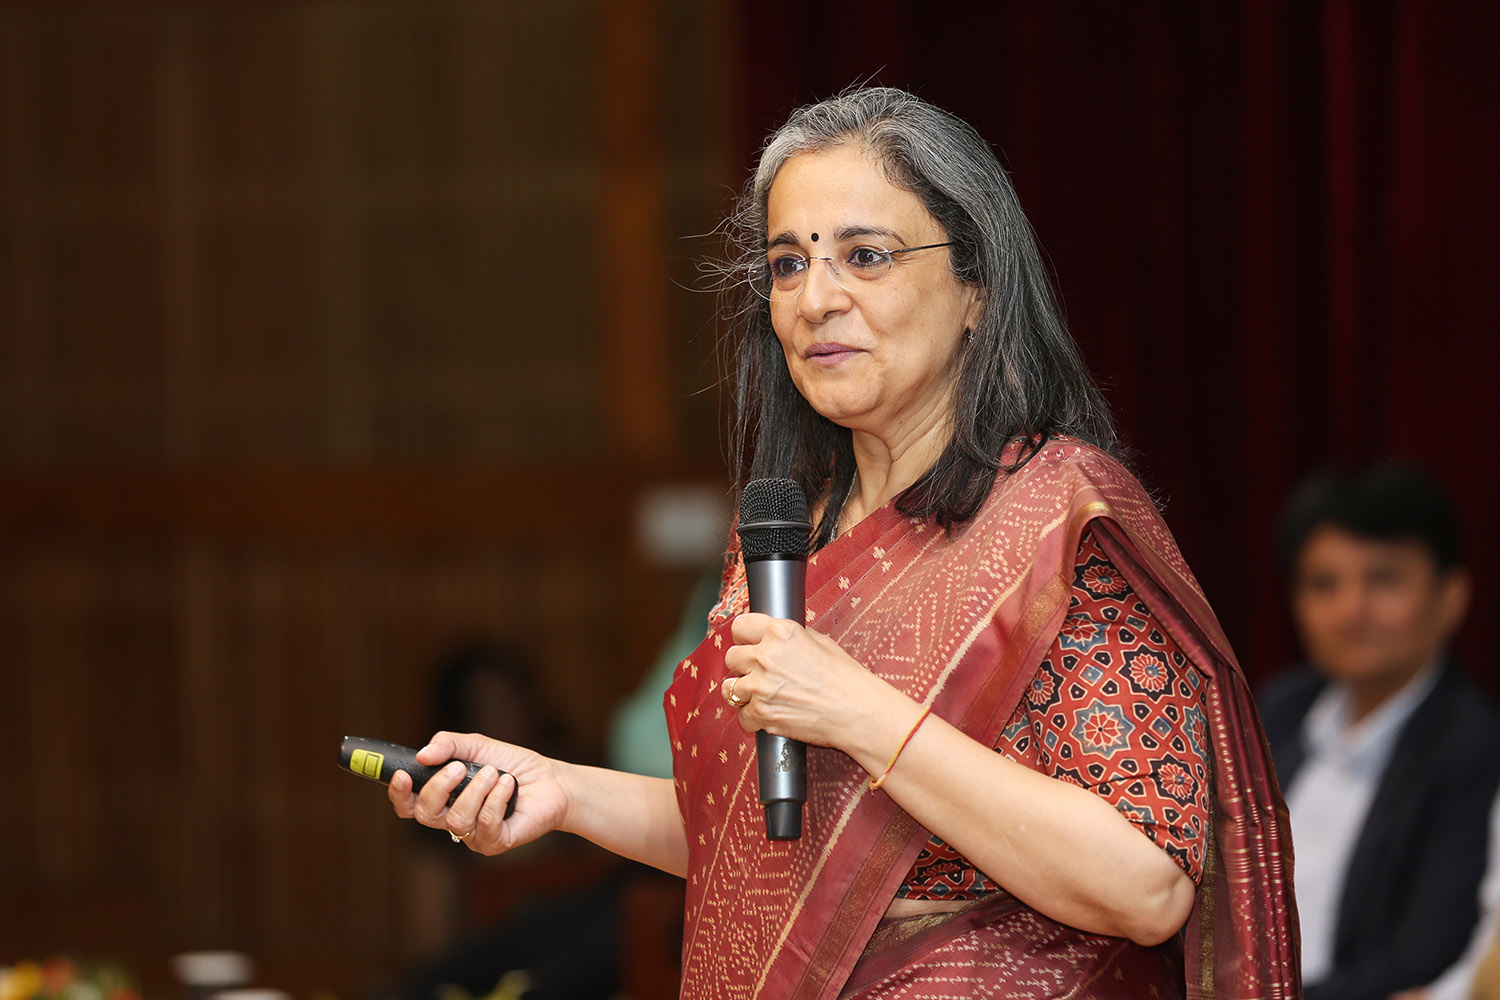 Chief Guest Ms Madhabi Puri-Buch, Chairperson, Securities and Exchange Board of India (SEBI), delivers the Foundation Day Lecture on ‘Data and Technology in the Capital Market’, during IIMB’s 49th Foundation Day on October 28, 2022.